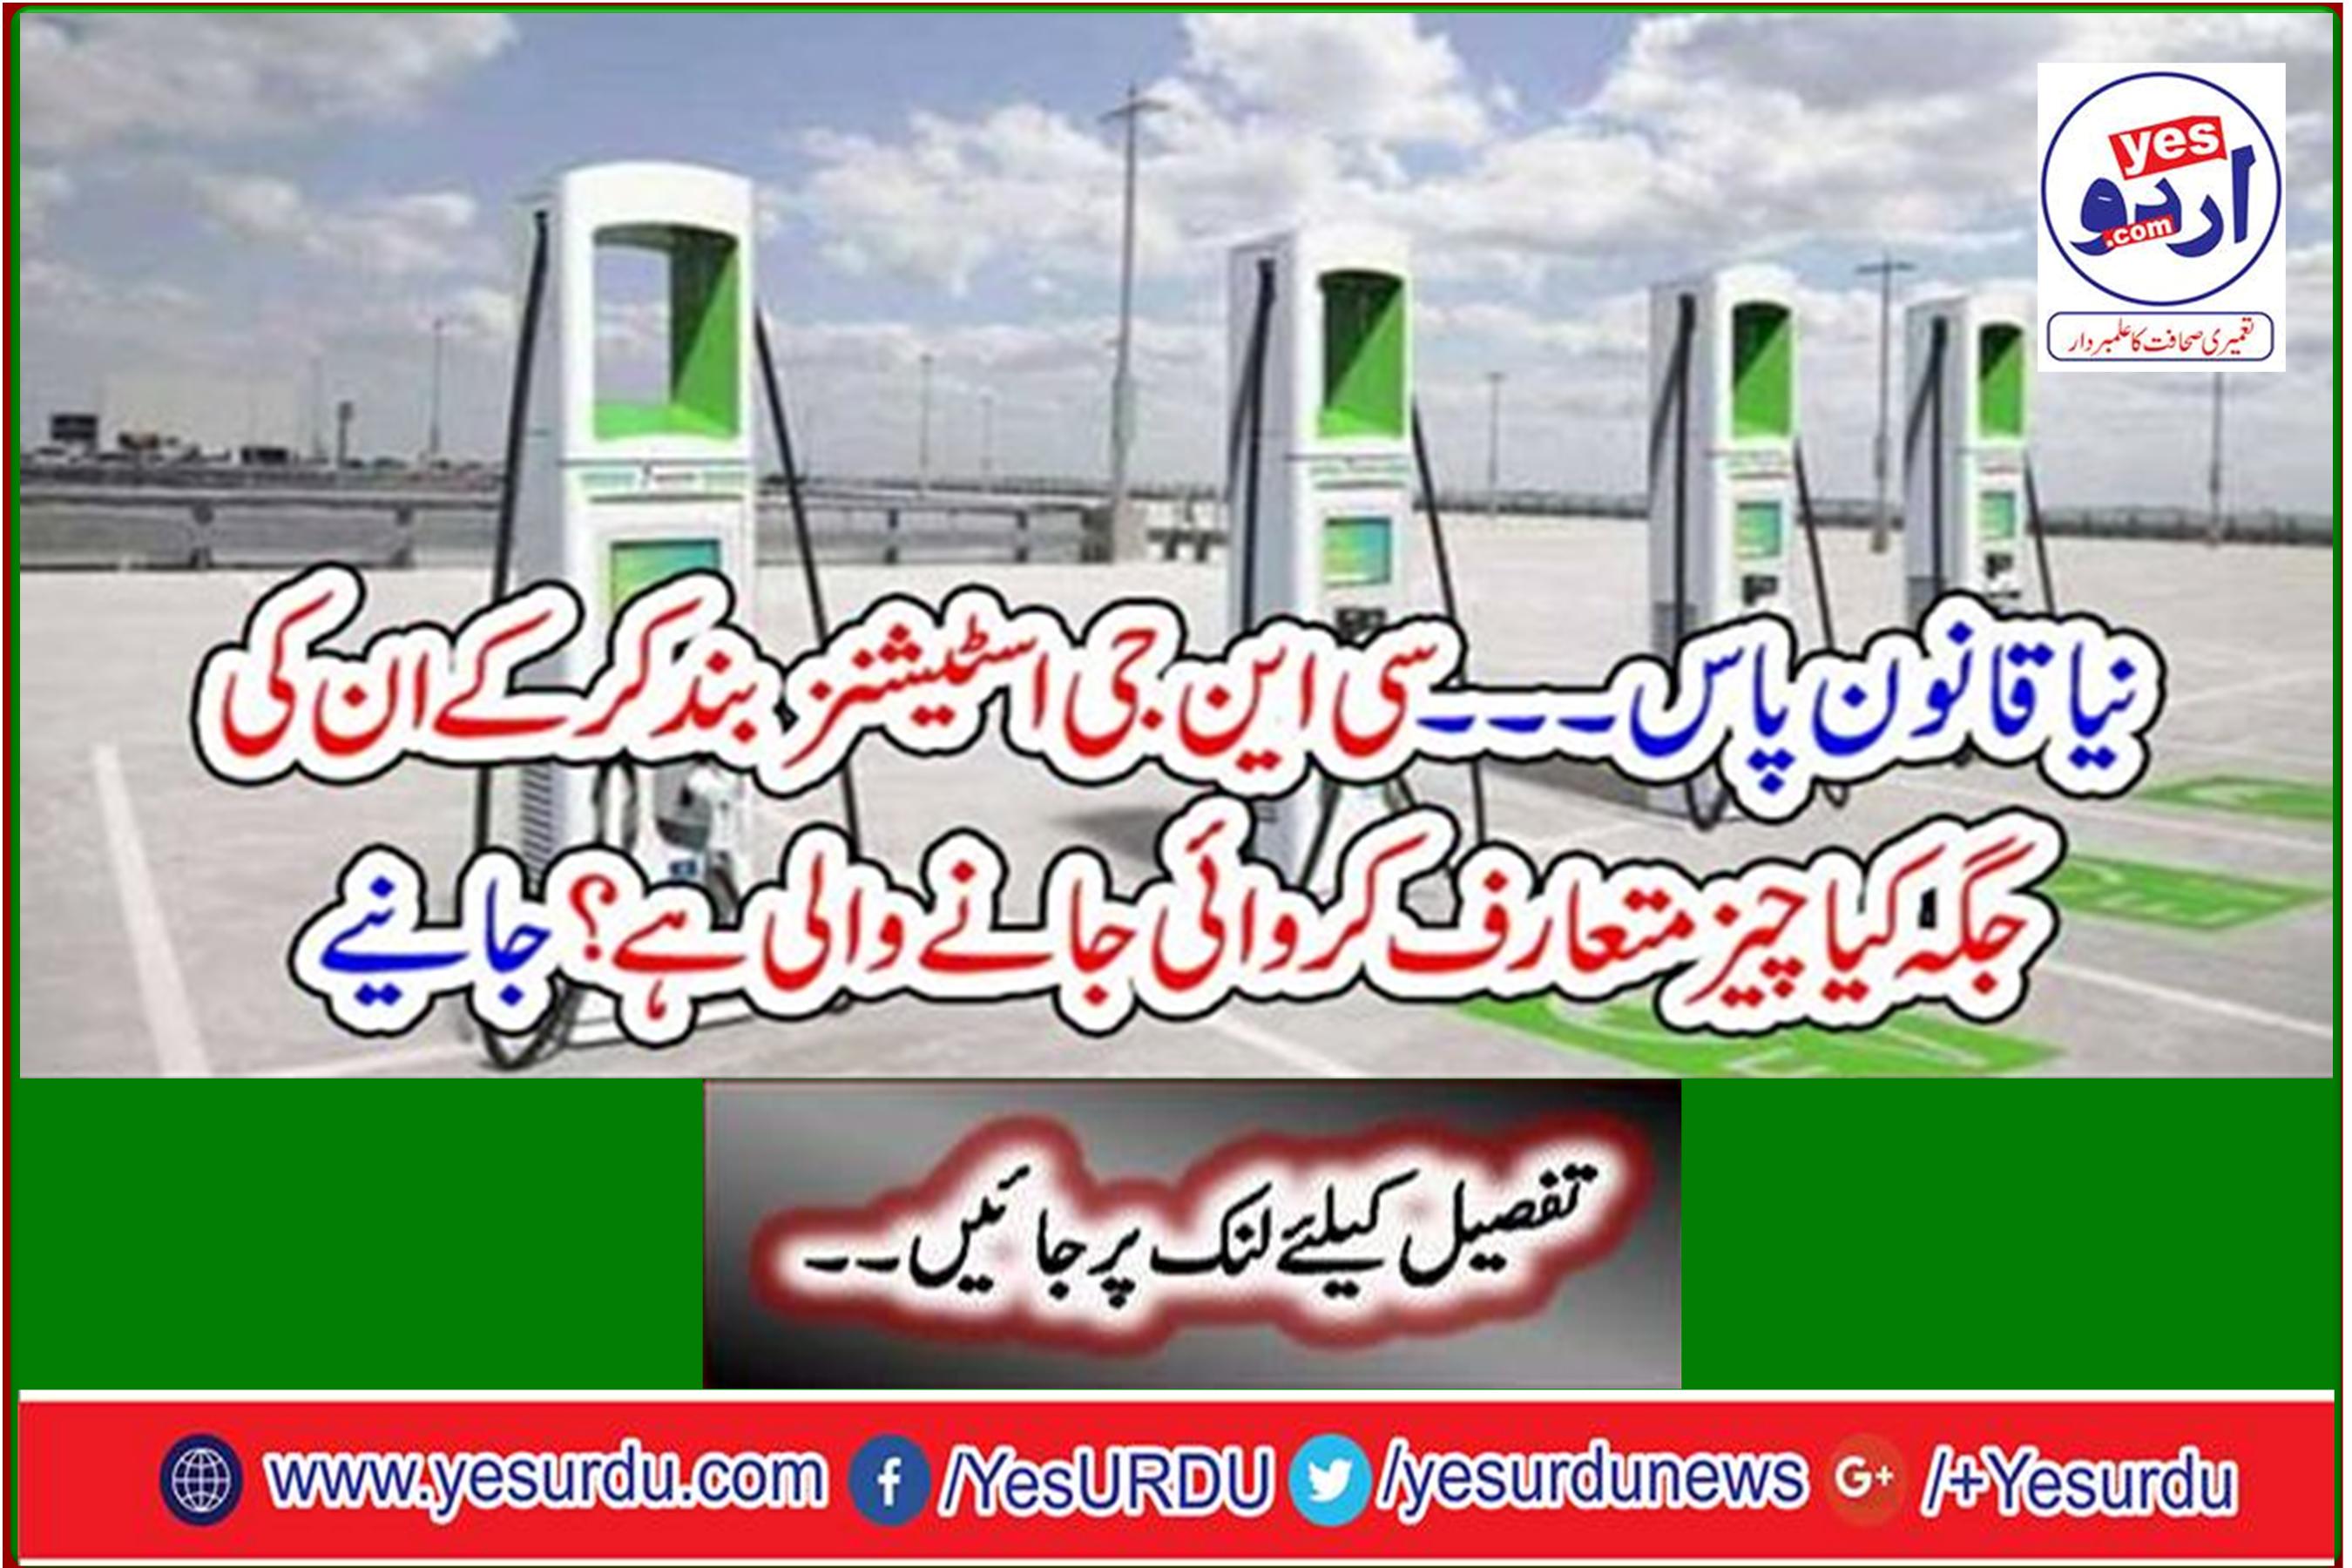 New law passed ... What is being introduced to CNG stations and replacing them? Learn